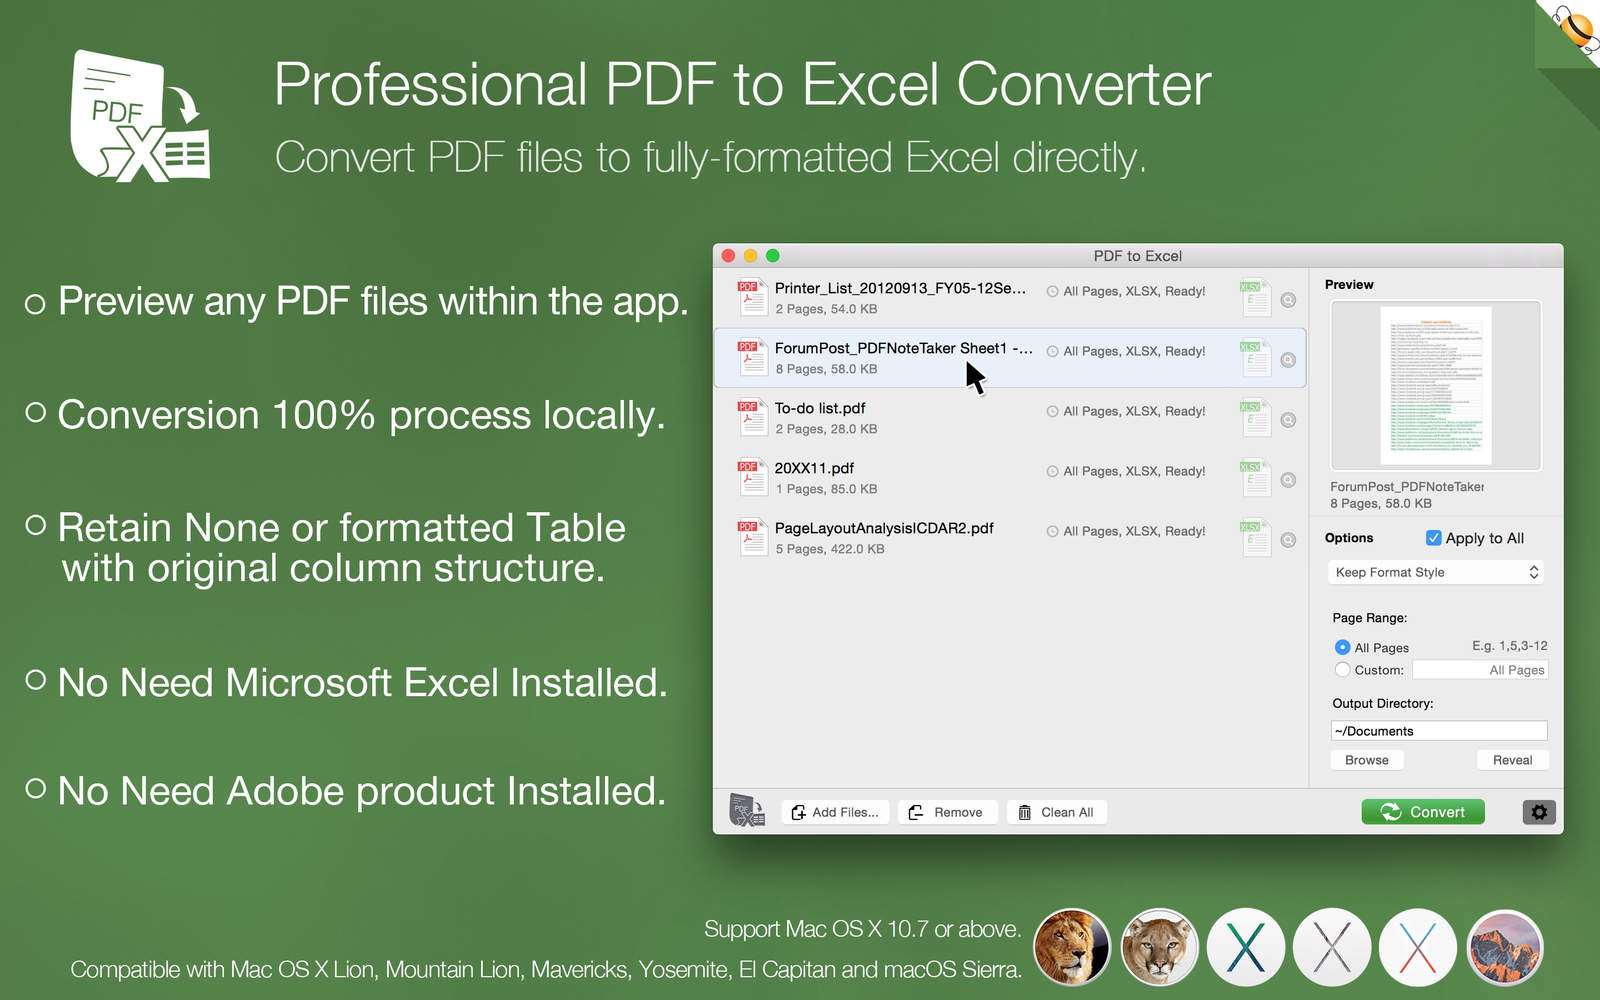 PDF to Excel Pro by Flyingbee 1.6 : Main Window